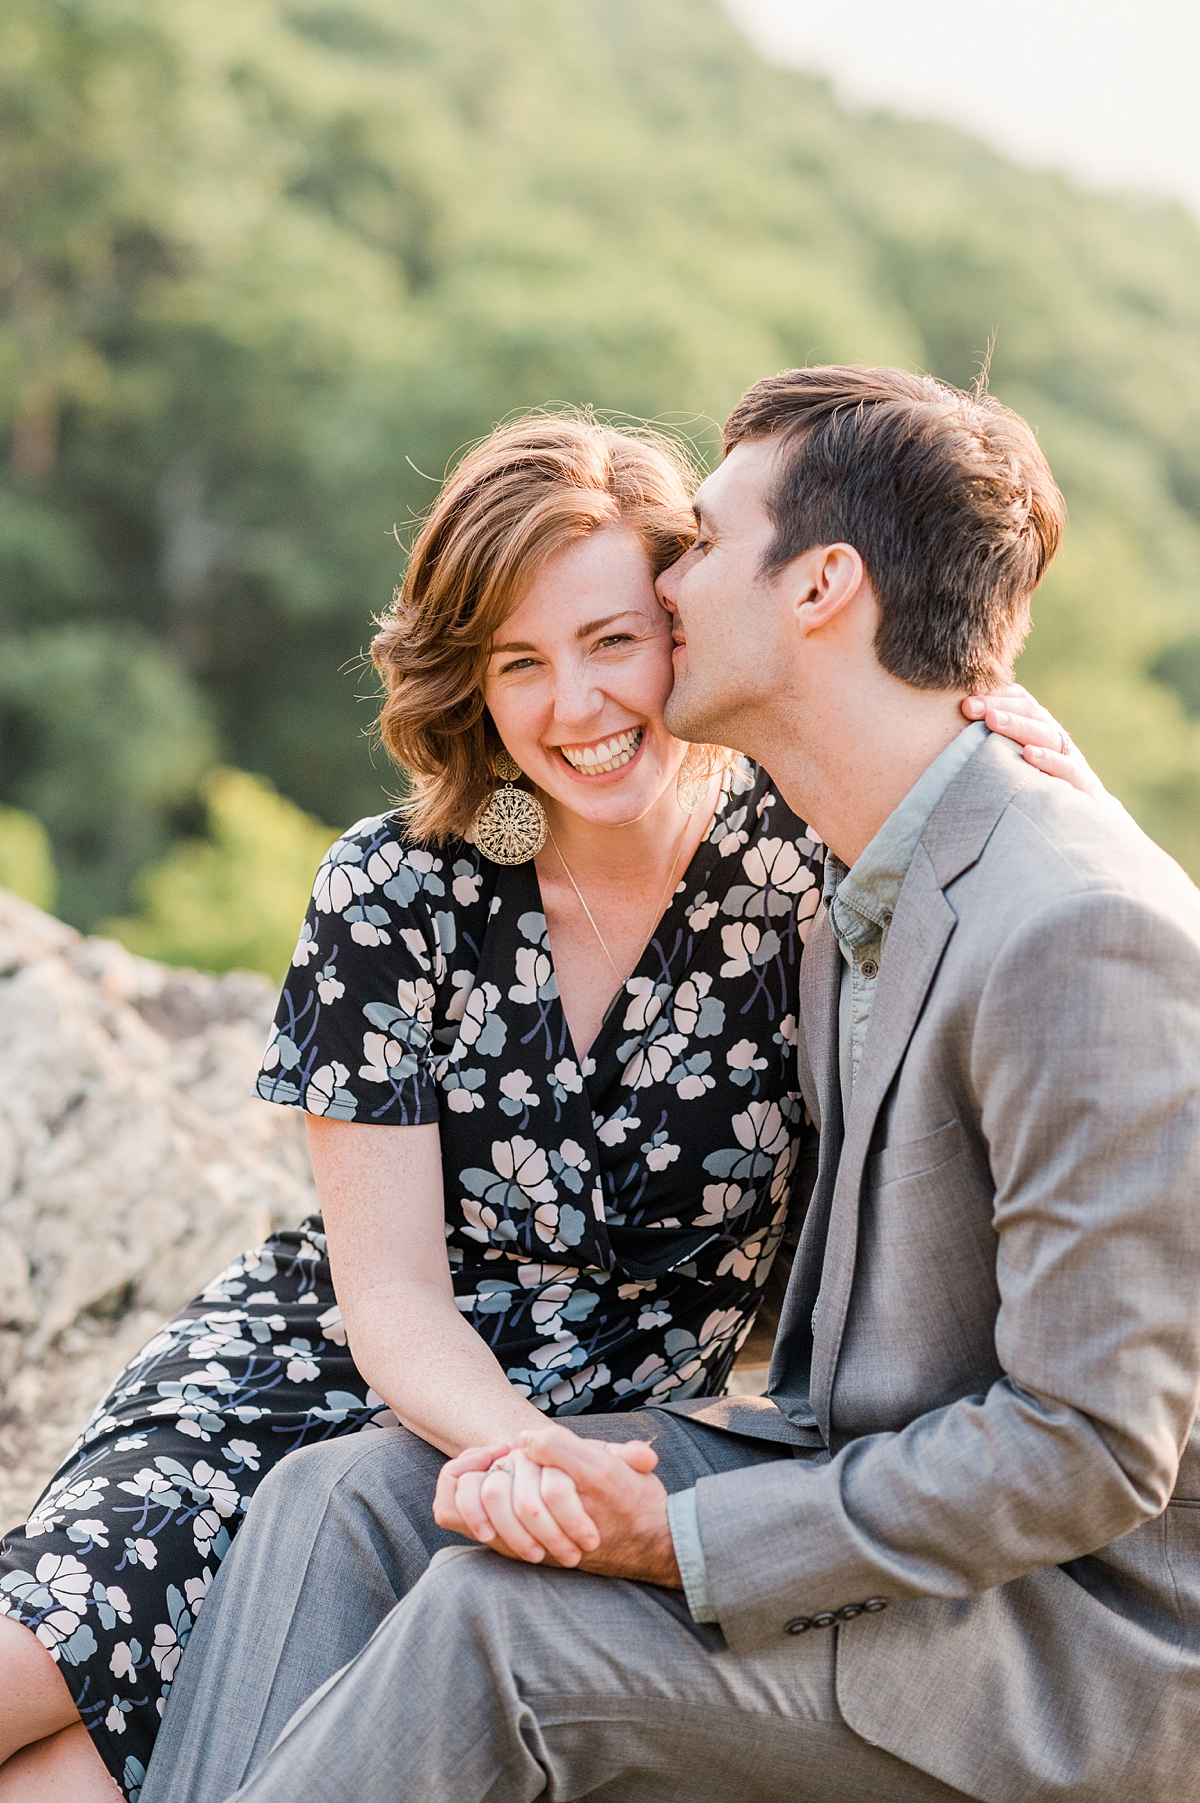 A Summer Raven's Roost Overlooked Engagement Session with Mountain Views. Photography by Virginia Wedding Photographer Kailey Brianne Photography. 